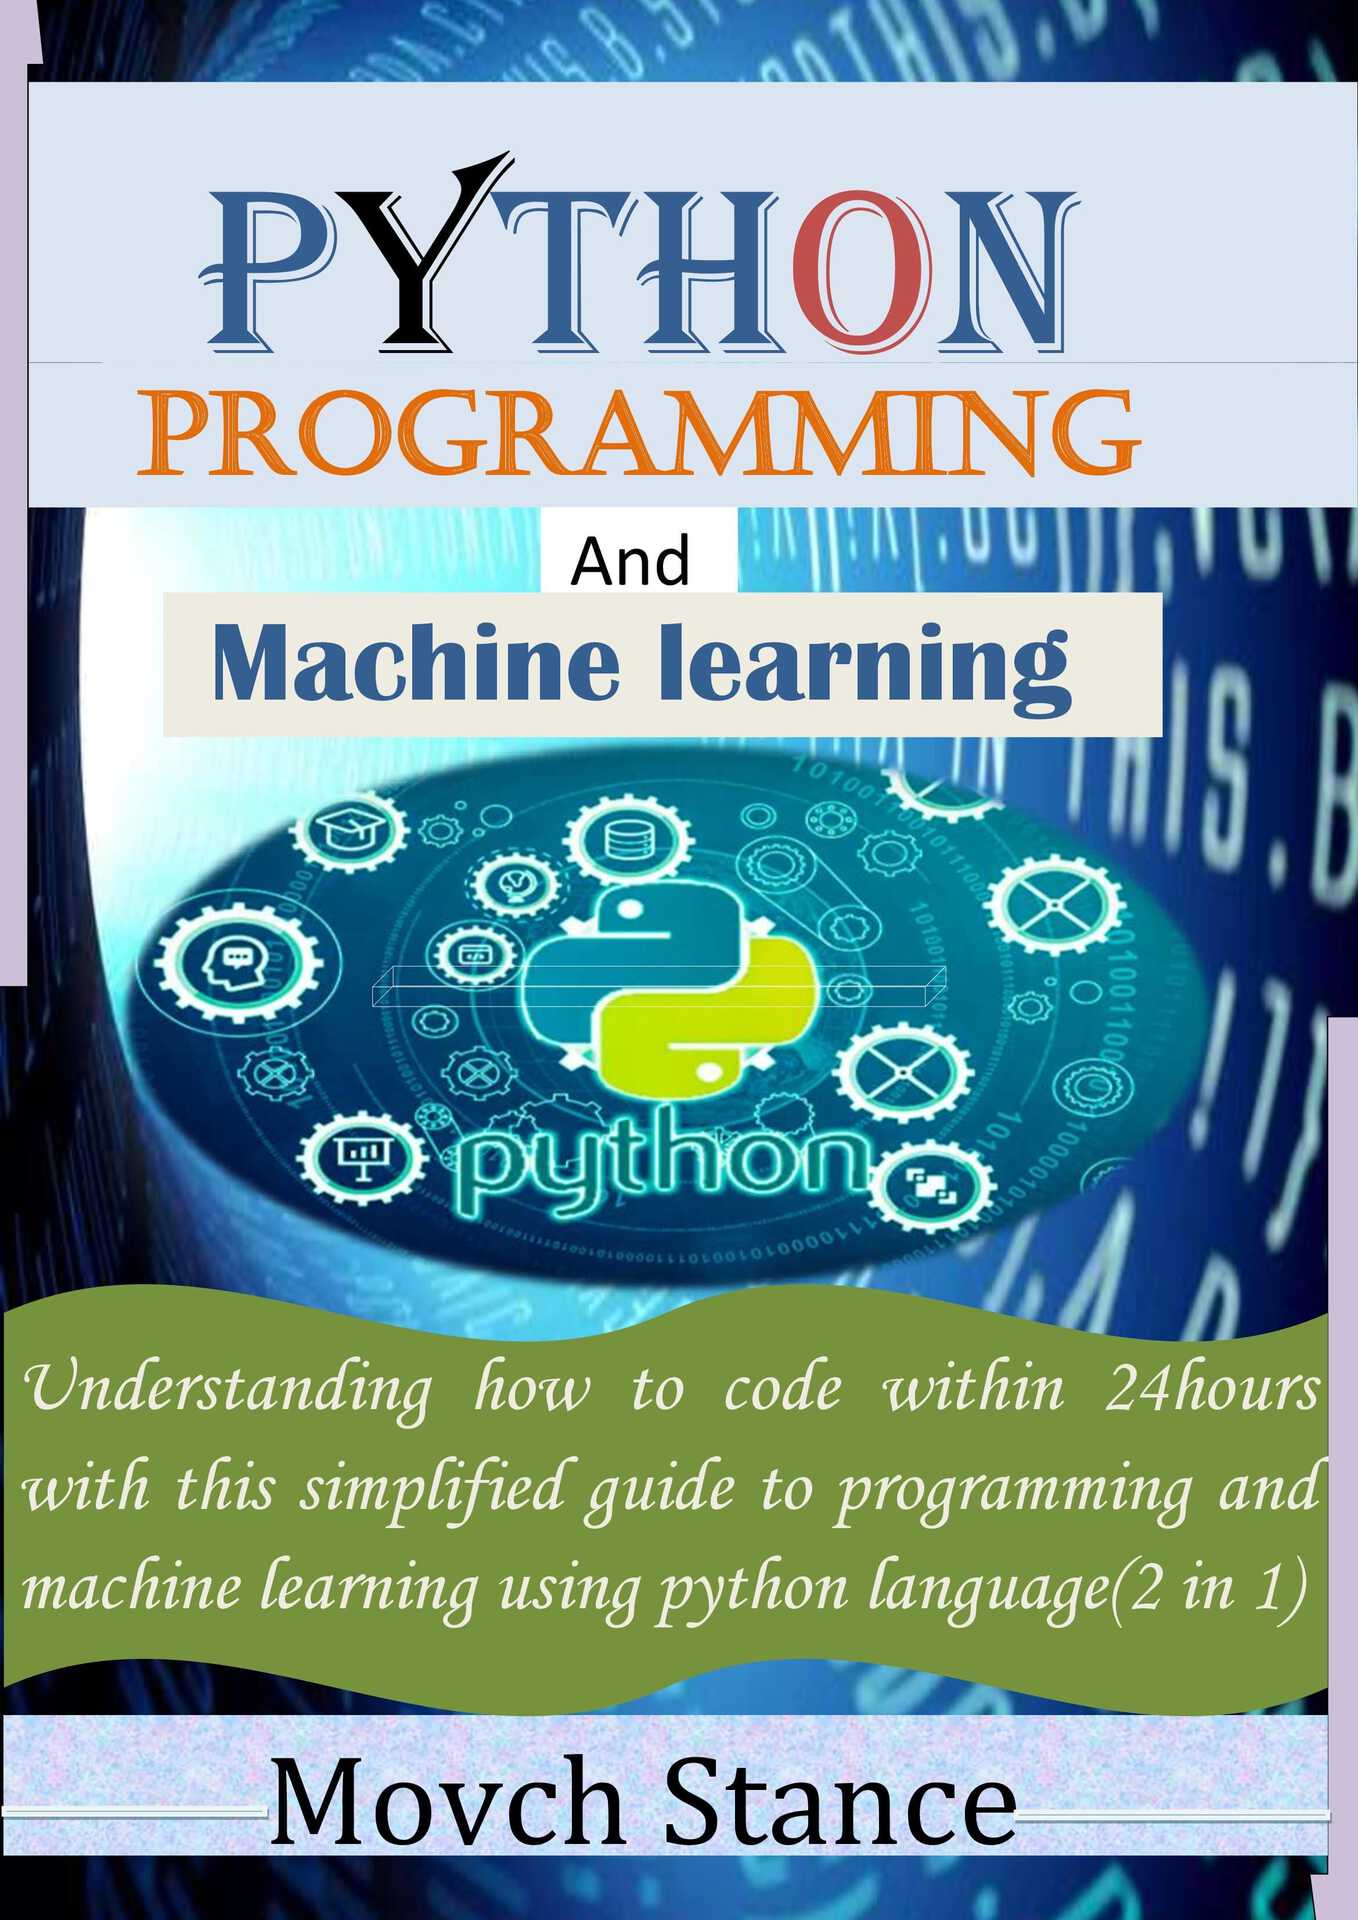 Python Programming and Maching Learning: Understanding How to Code within 24hours with this Simplified Guide to Programming and Machine Learning using Python Language(2 In 1)